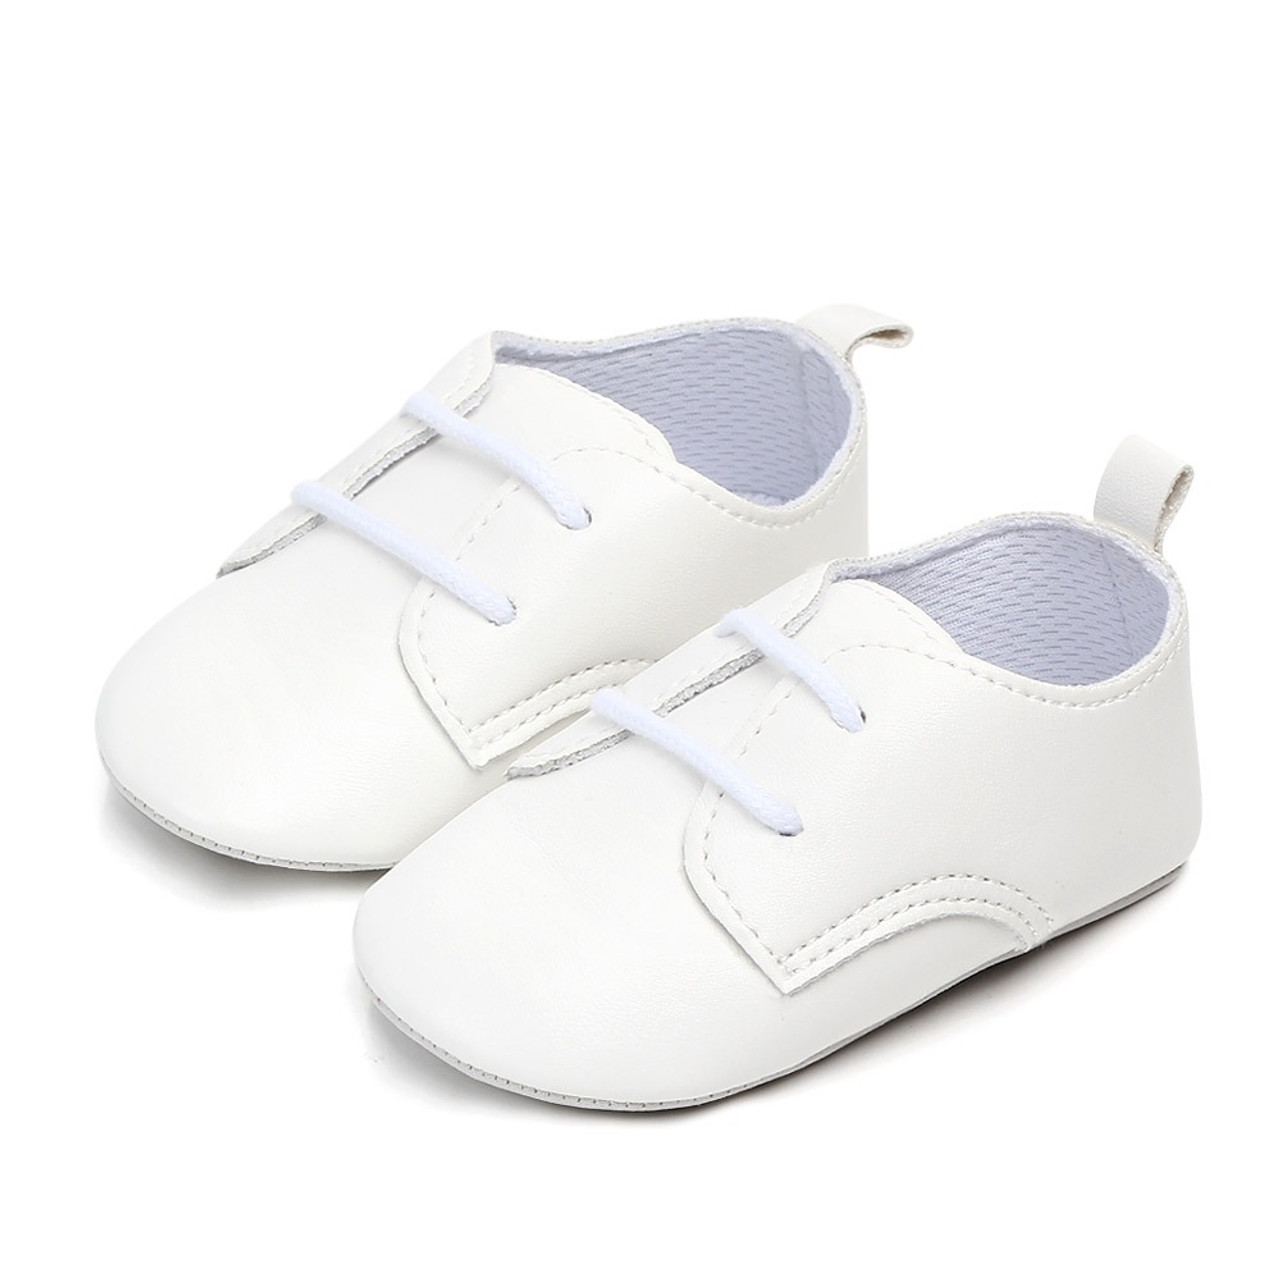 Baby Toddler Boy White Loafers, Boy Wedding Shoes, Baby Boys Dress Shoes, Toddler Boys Dress Shoes, Christening Shoes, Baptism Baby Shoes